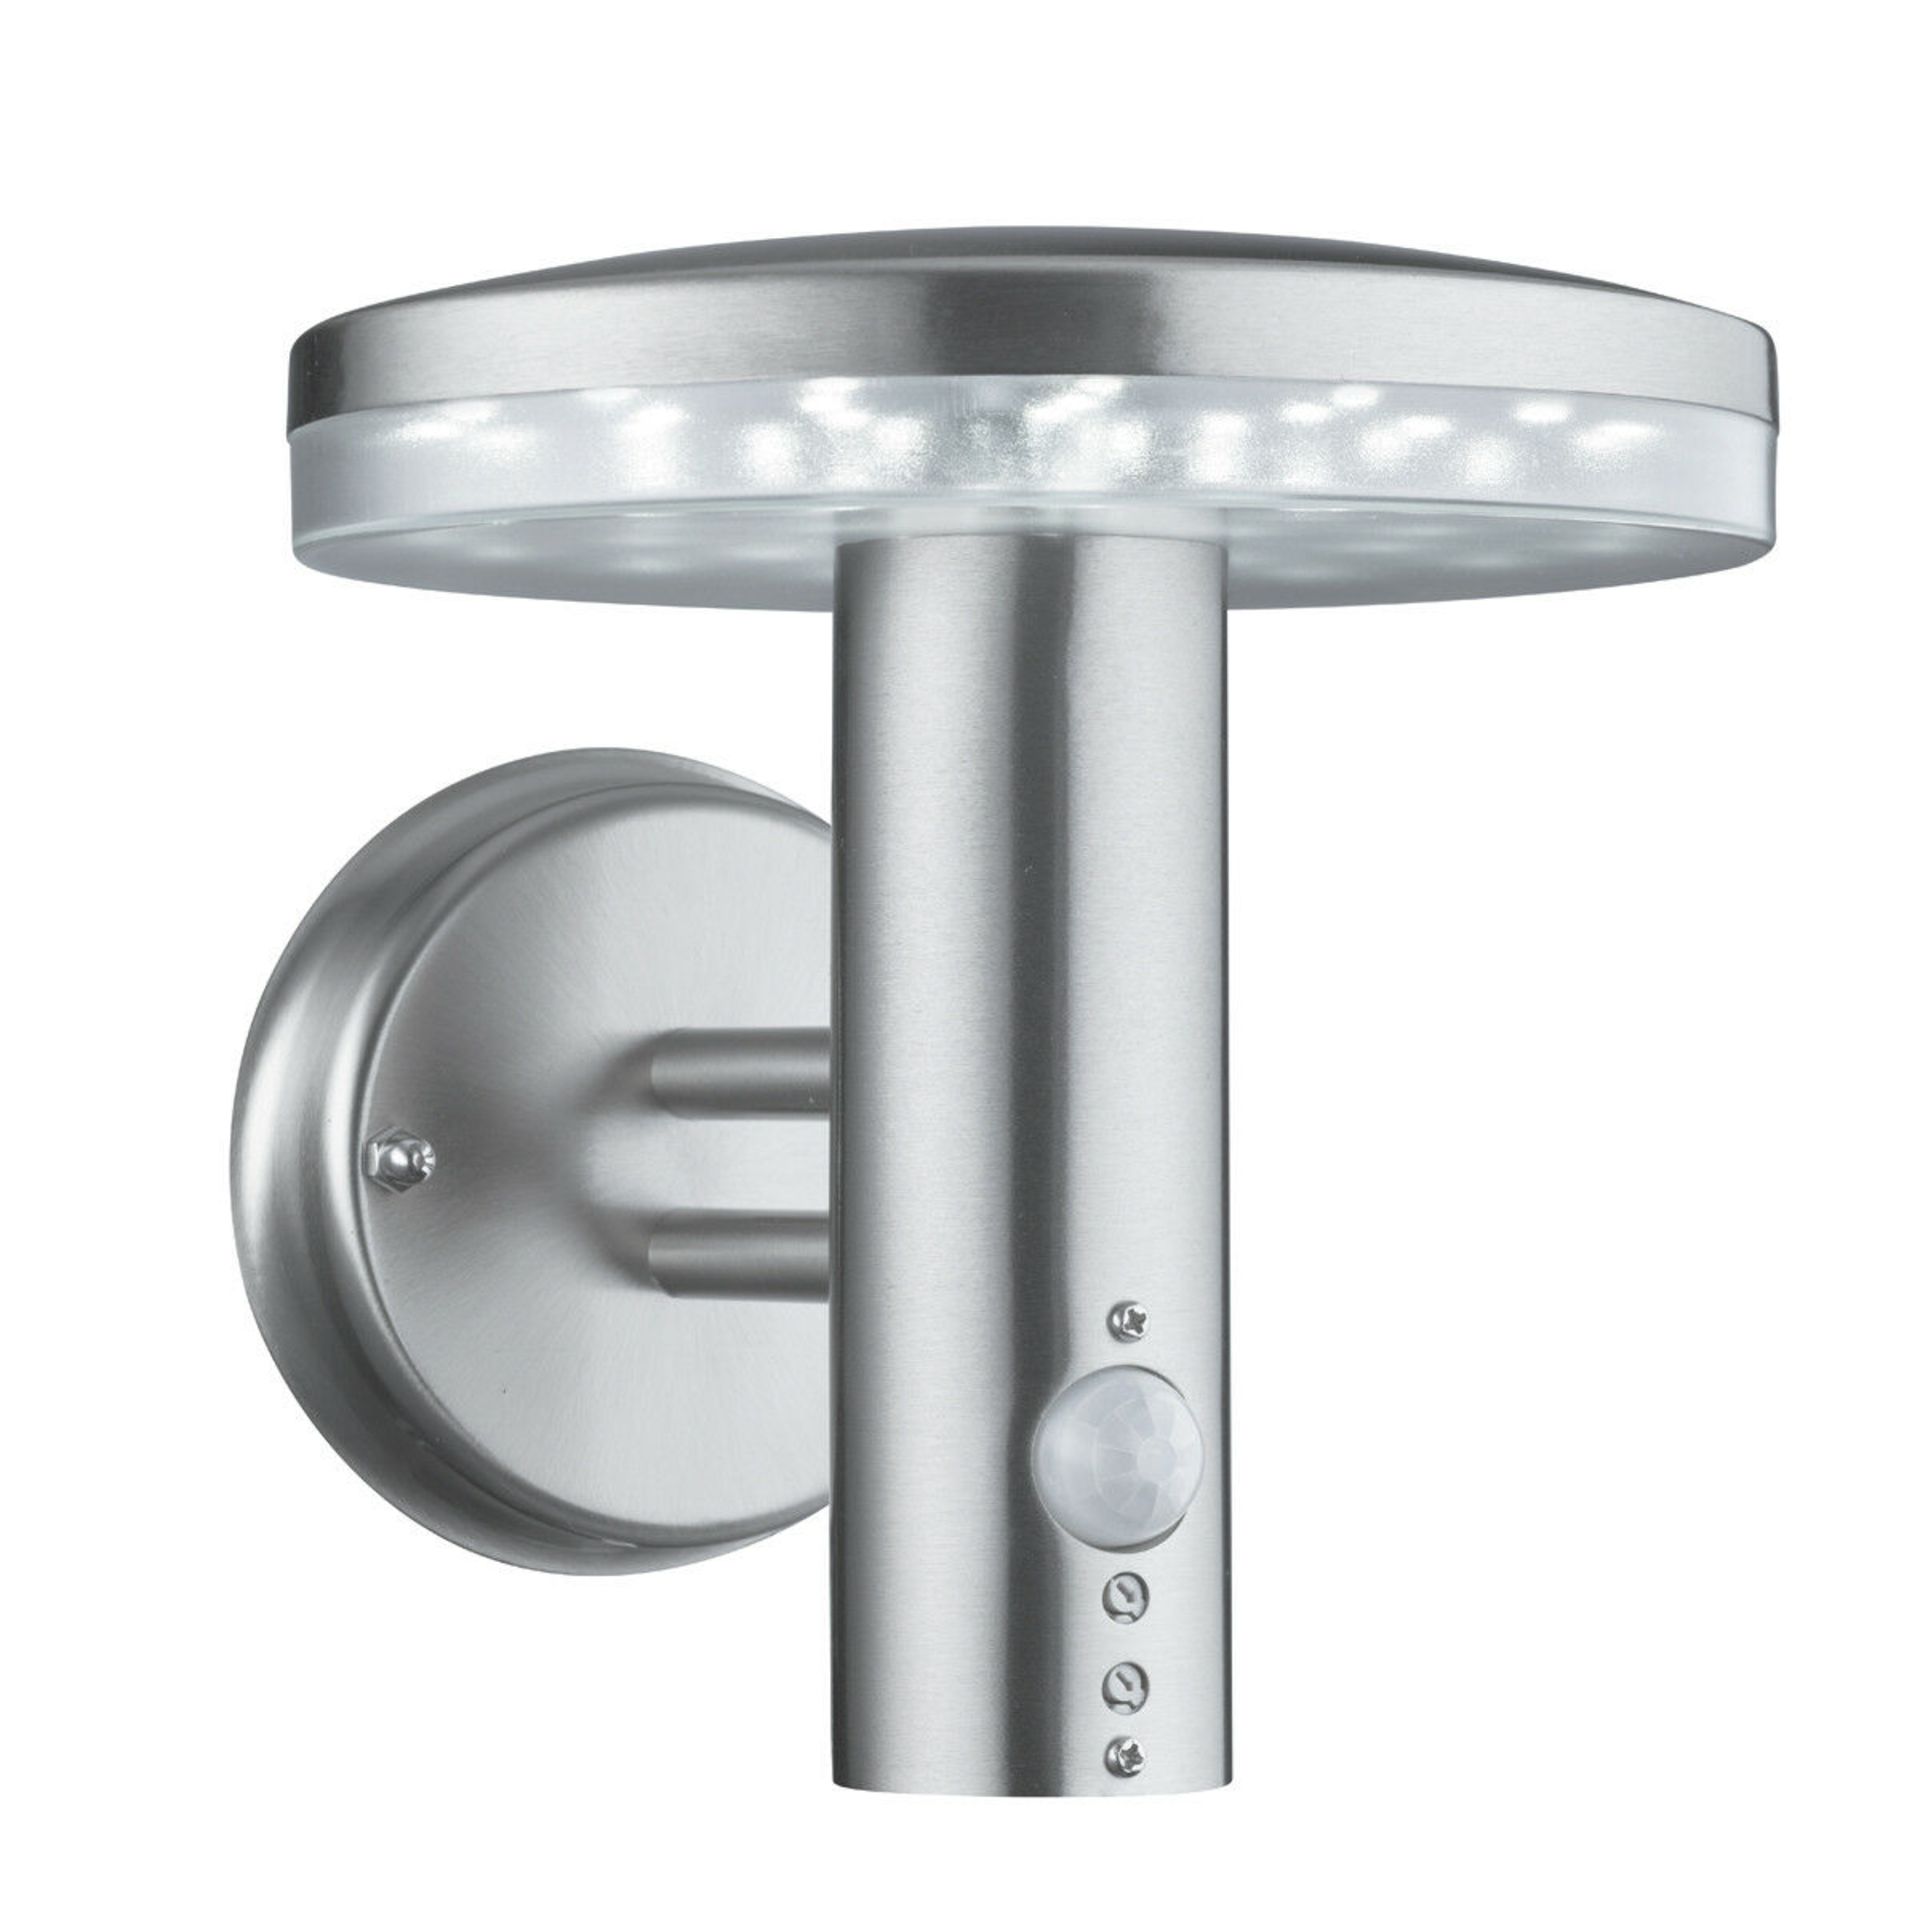 2 x SearchlightOutdoor LED Wall Lights in Brushed Chrome IP44 - Product Code 4774 - New Boxed - Image 2 of 2